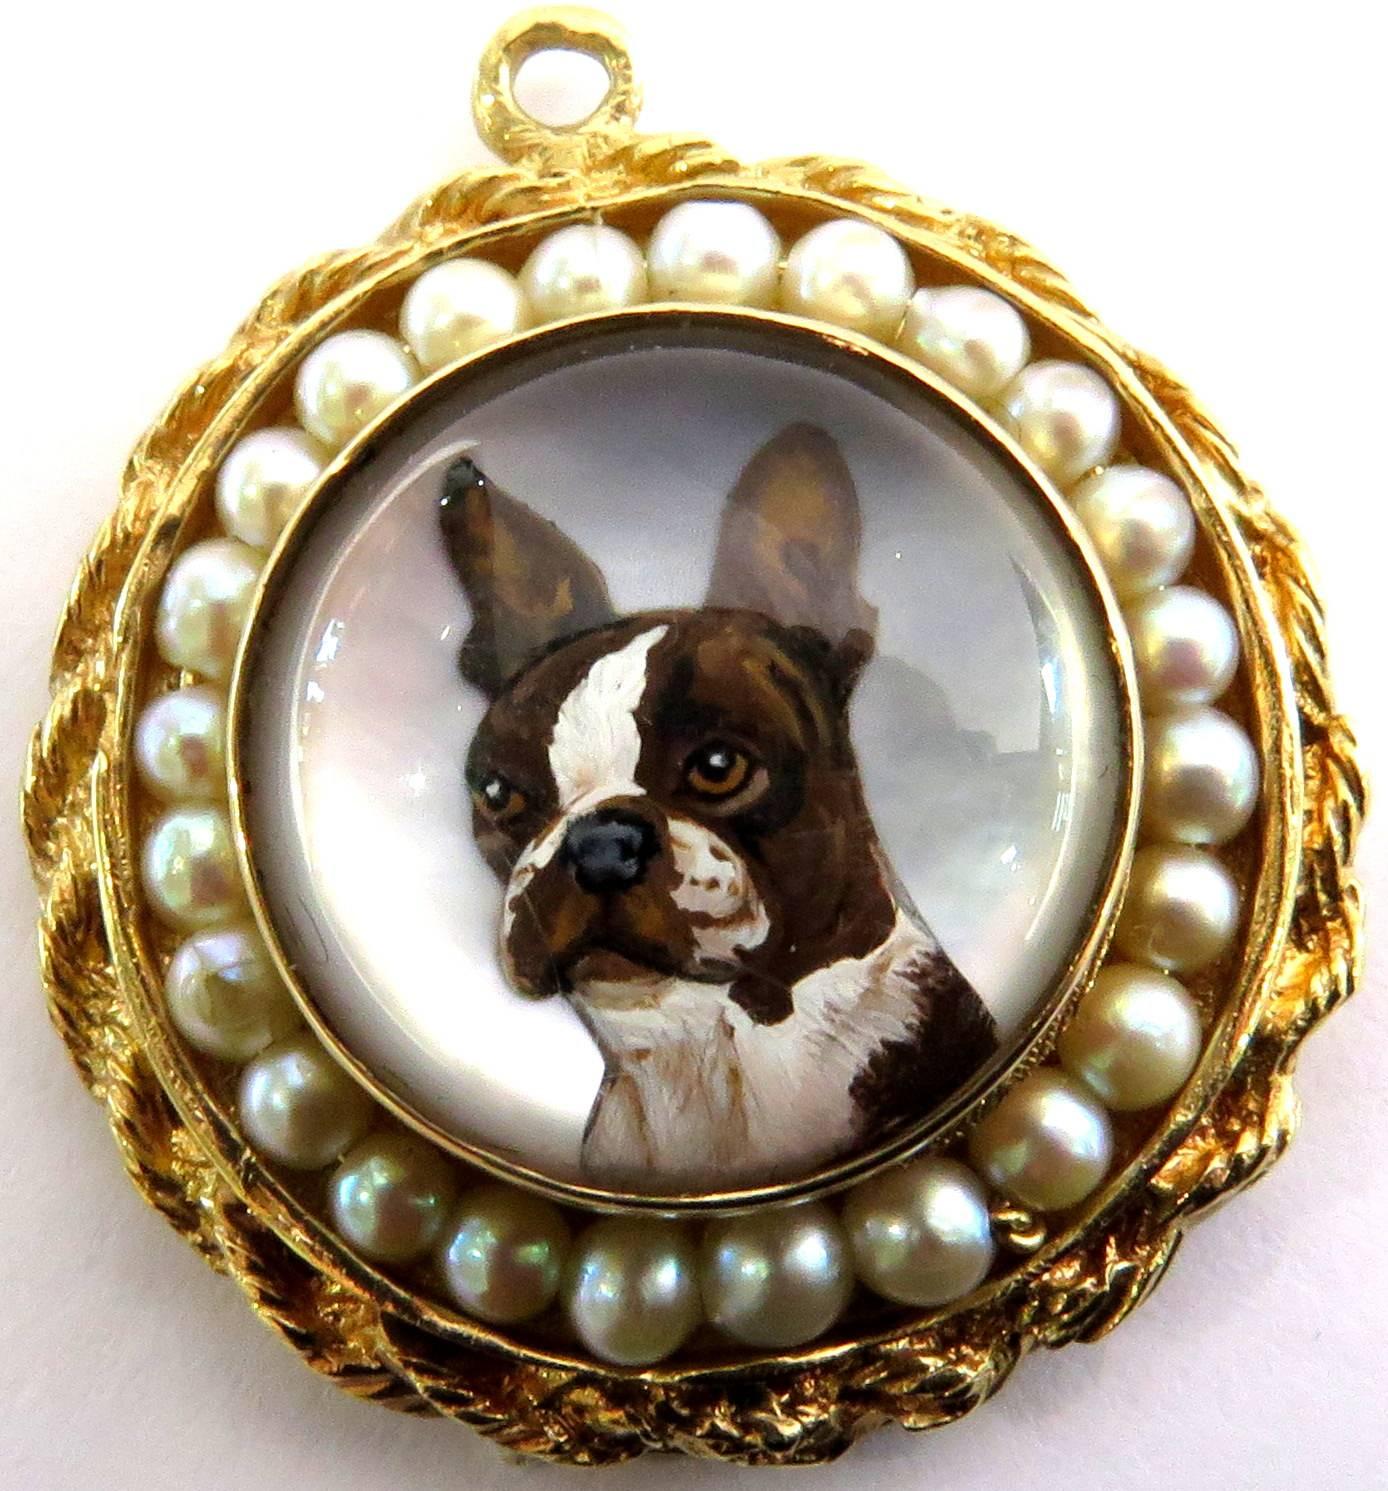 This incredibly detailed pendant charm really captures the essence of this adorable dog! The reverse crystal is deeply carved and amazingly painted. He is framed by a row of cultured pearls and then a rope design around that. 
This charm pendant